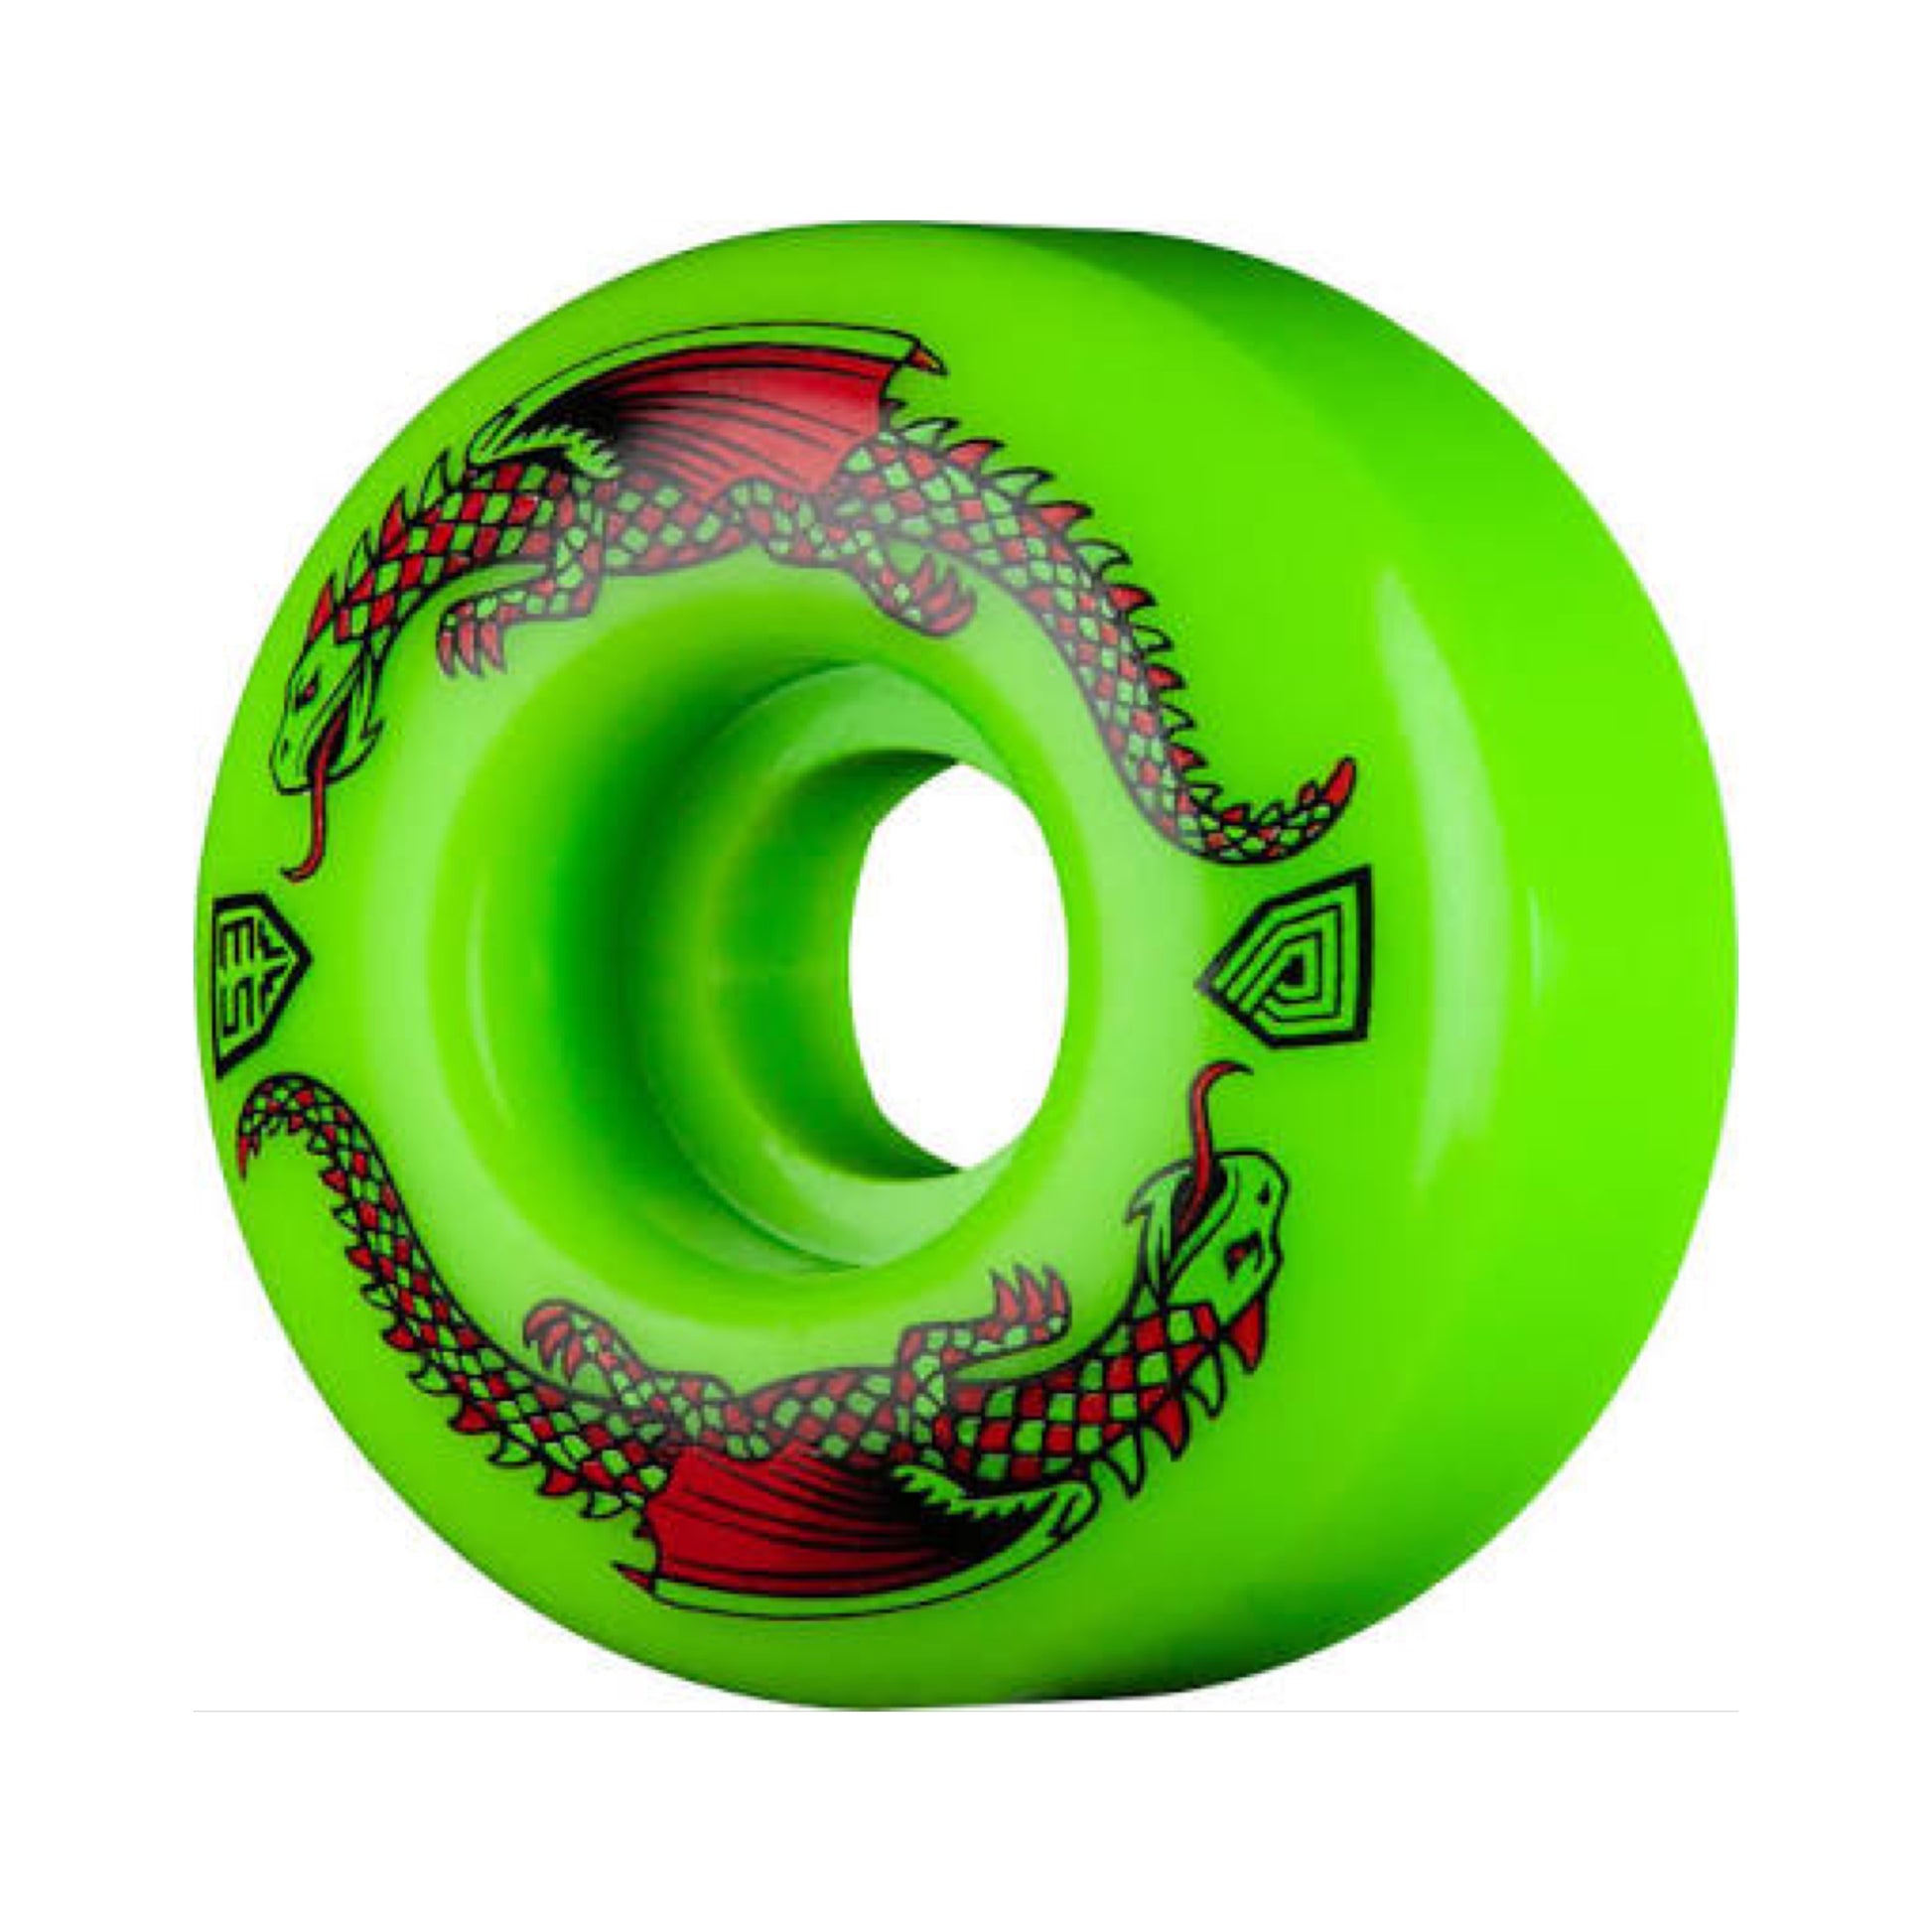 Powell Dragon Formula Skateboard Wheels; Neon green wheels with a green and red dragon on the side print; Eye-catching dragon graphic adds a unique and bold touch;